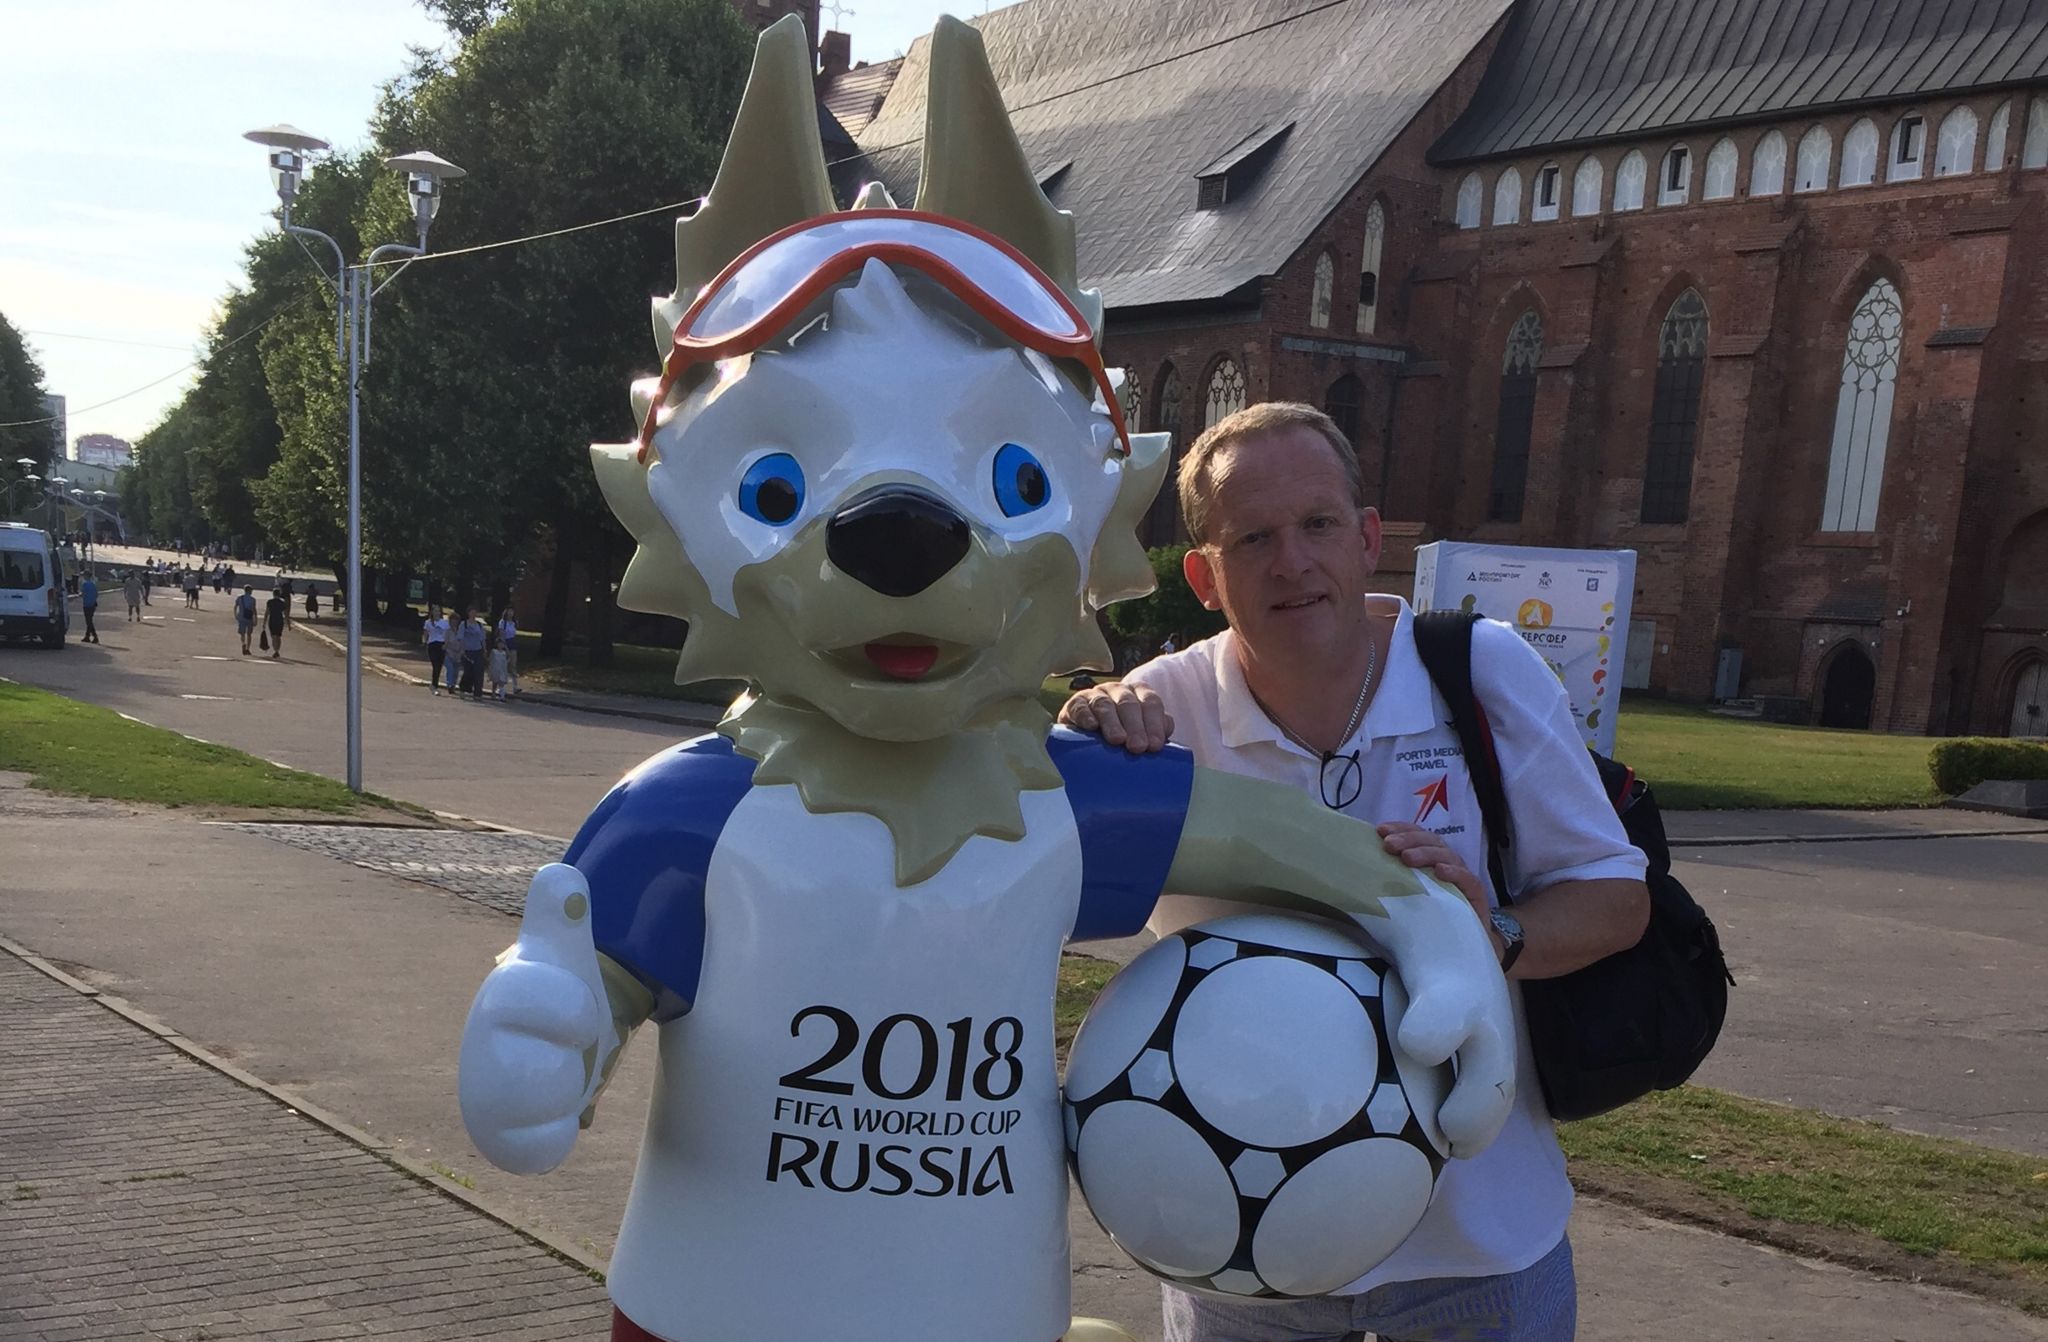 David Hancock at the 2018 Fifa World Cup in Russia